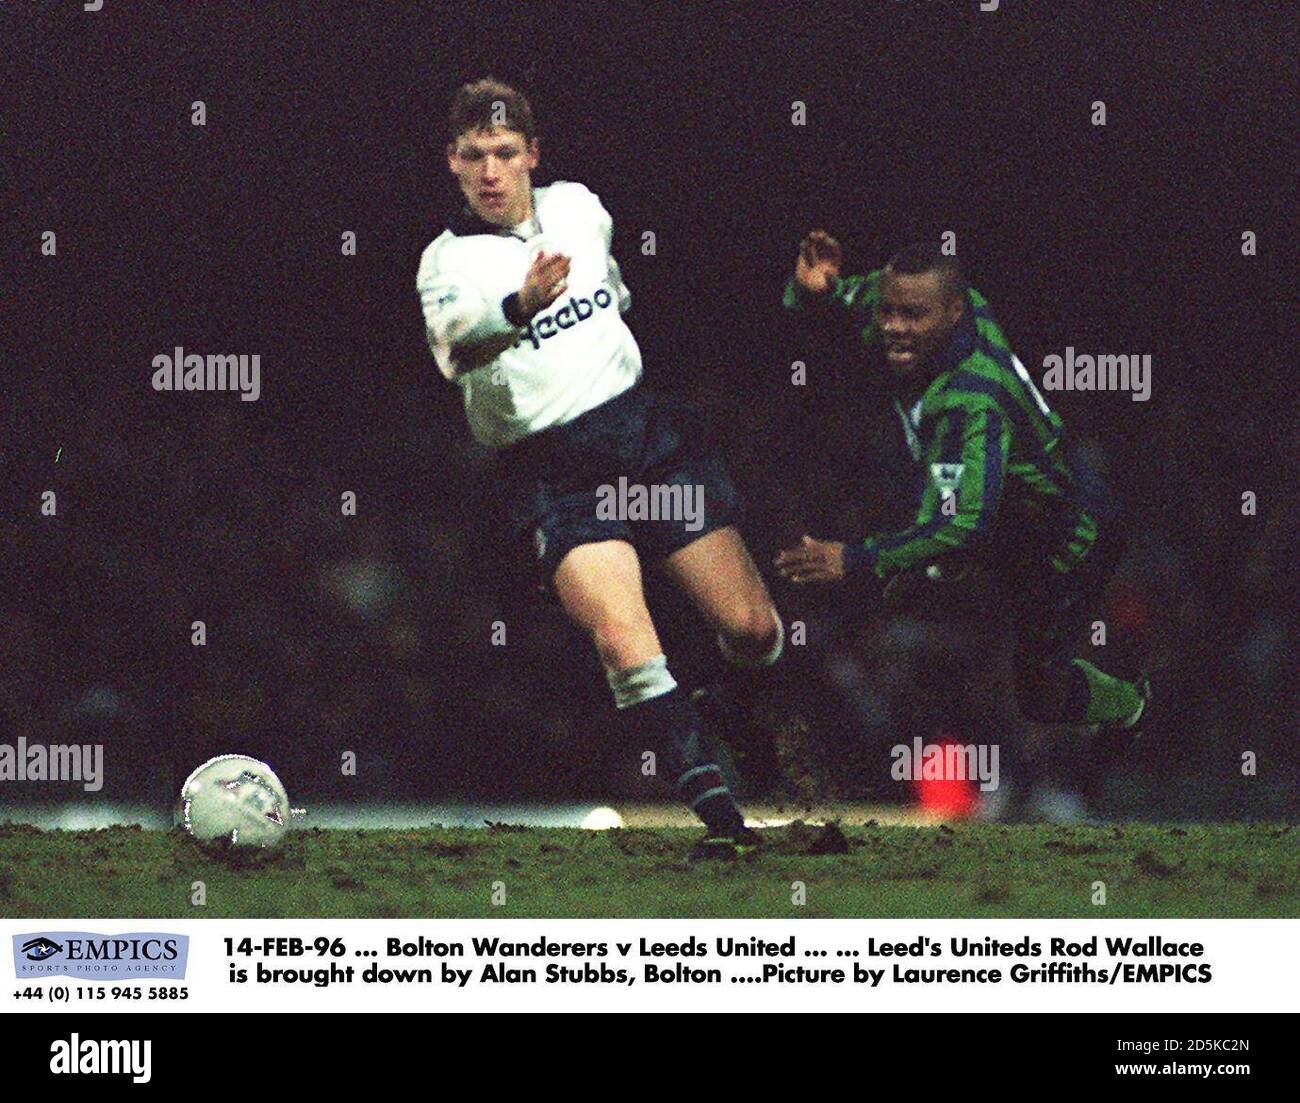 14-FEB-96 ... Bolton Wanderers v Leeds United ... ... Leeds United's Rod Wallace is brought down by Alan Stubbs of Bolton ....Picture by Laurence Griffiths/EMPICS Stock Photo